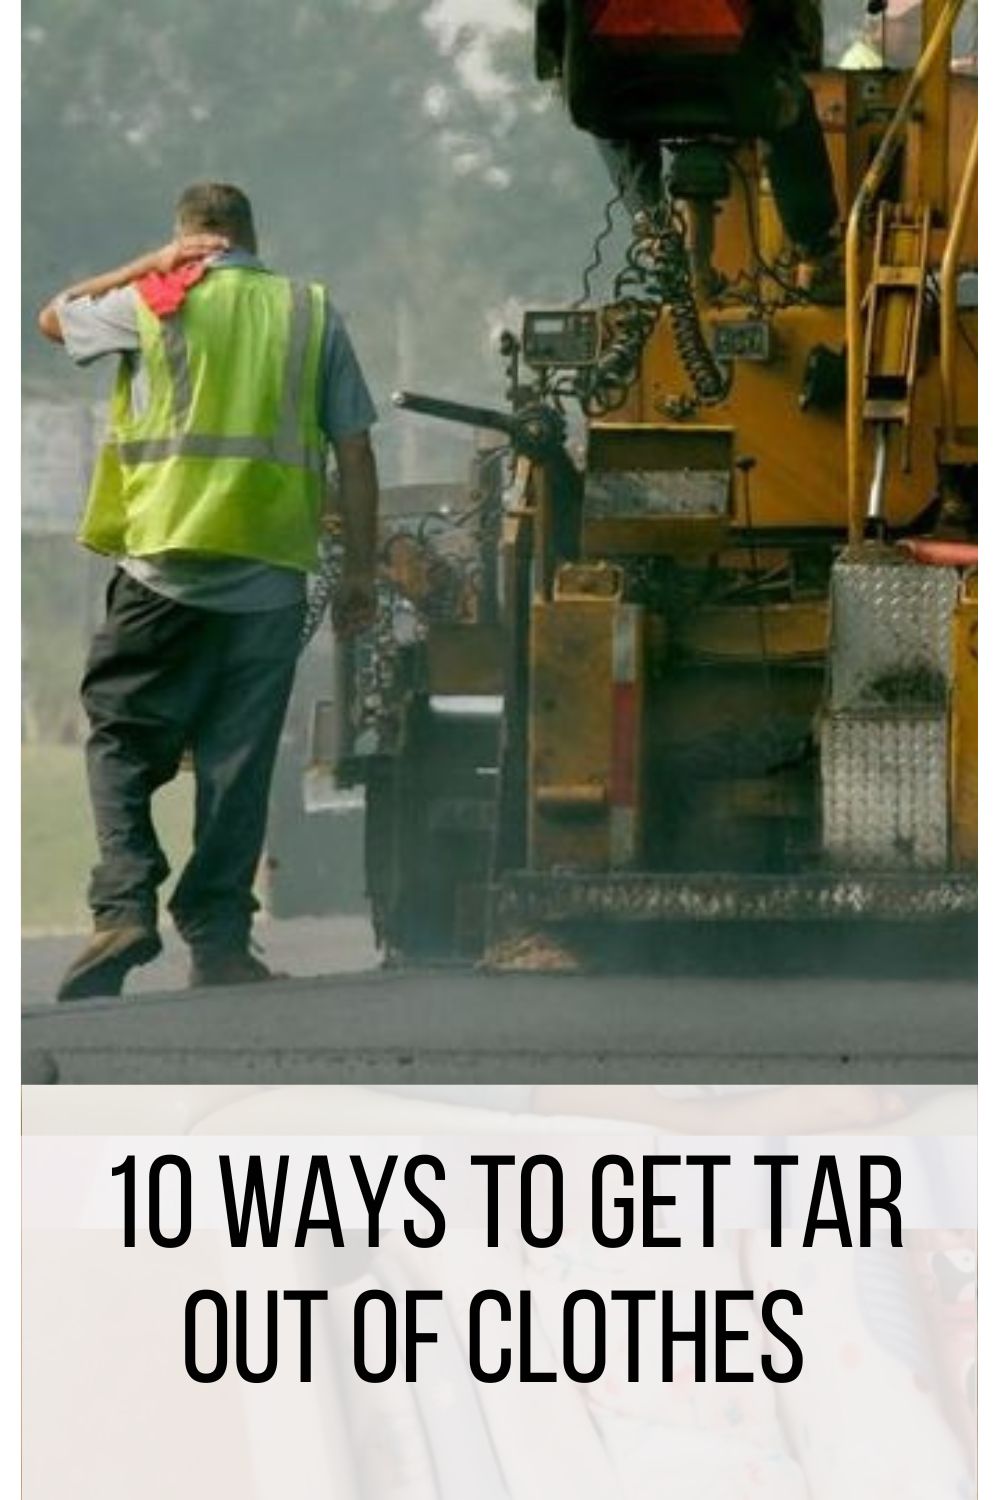 10 Ways to Get Tar Out of Clothes